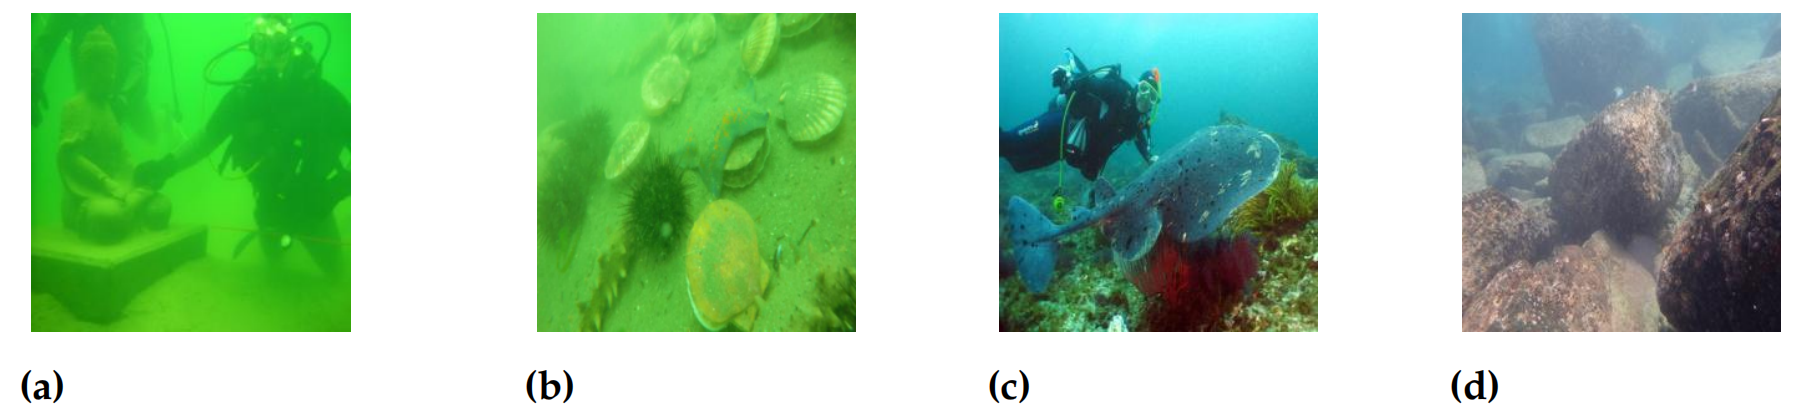 Fig1. Typical underwater images